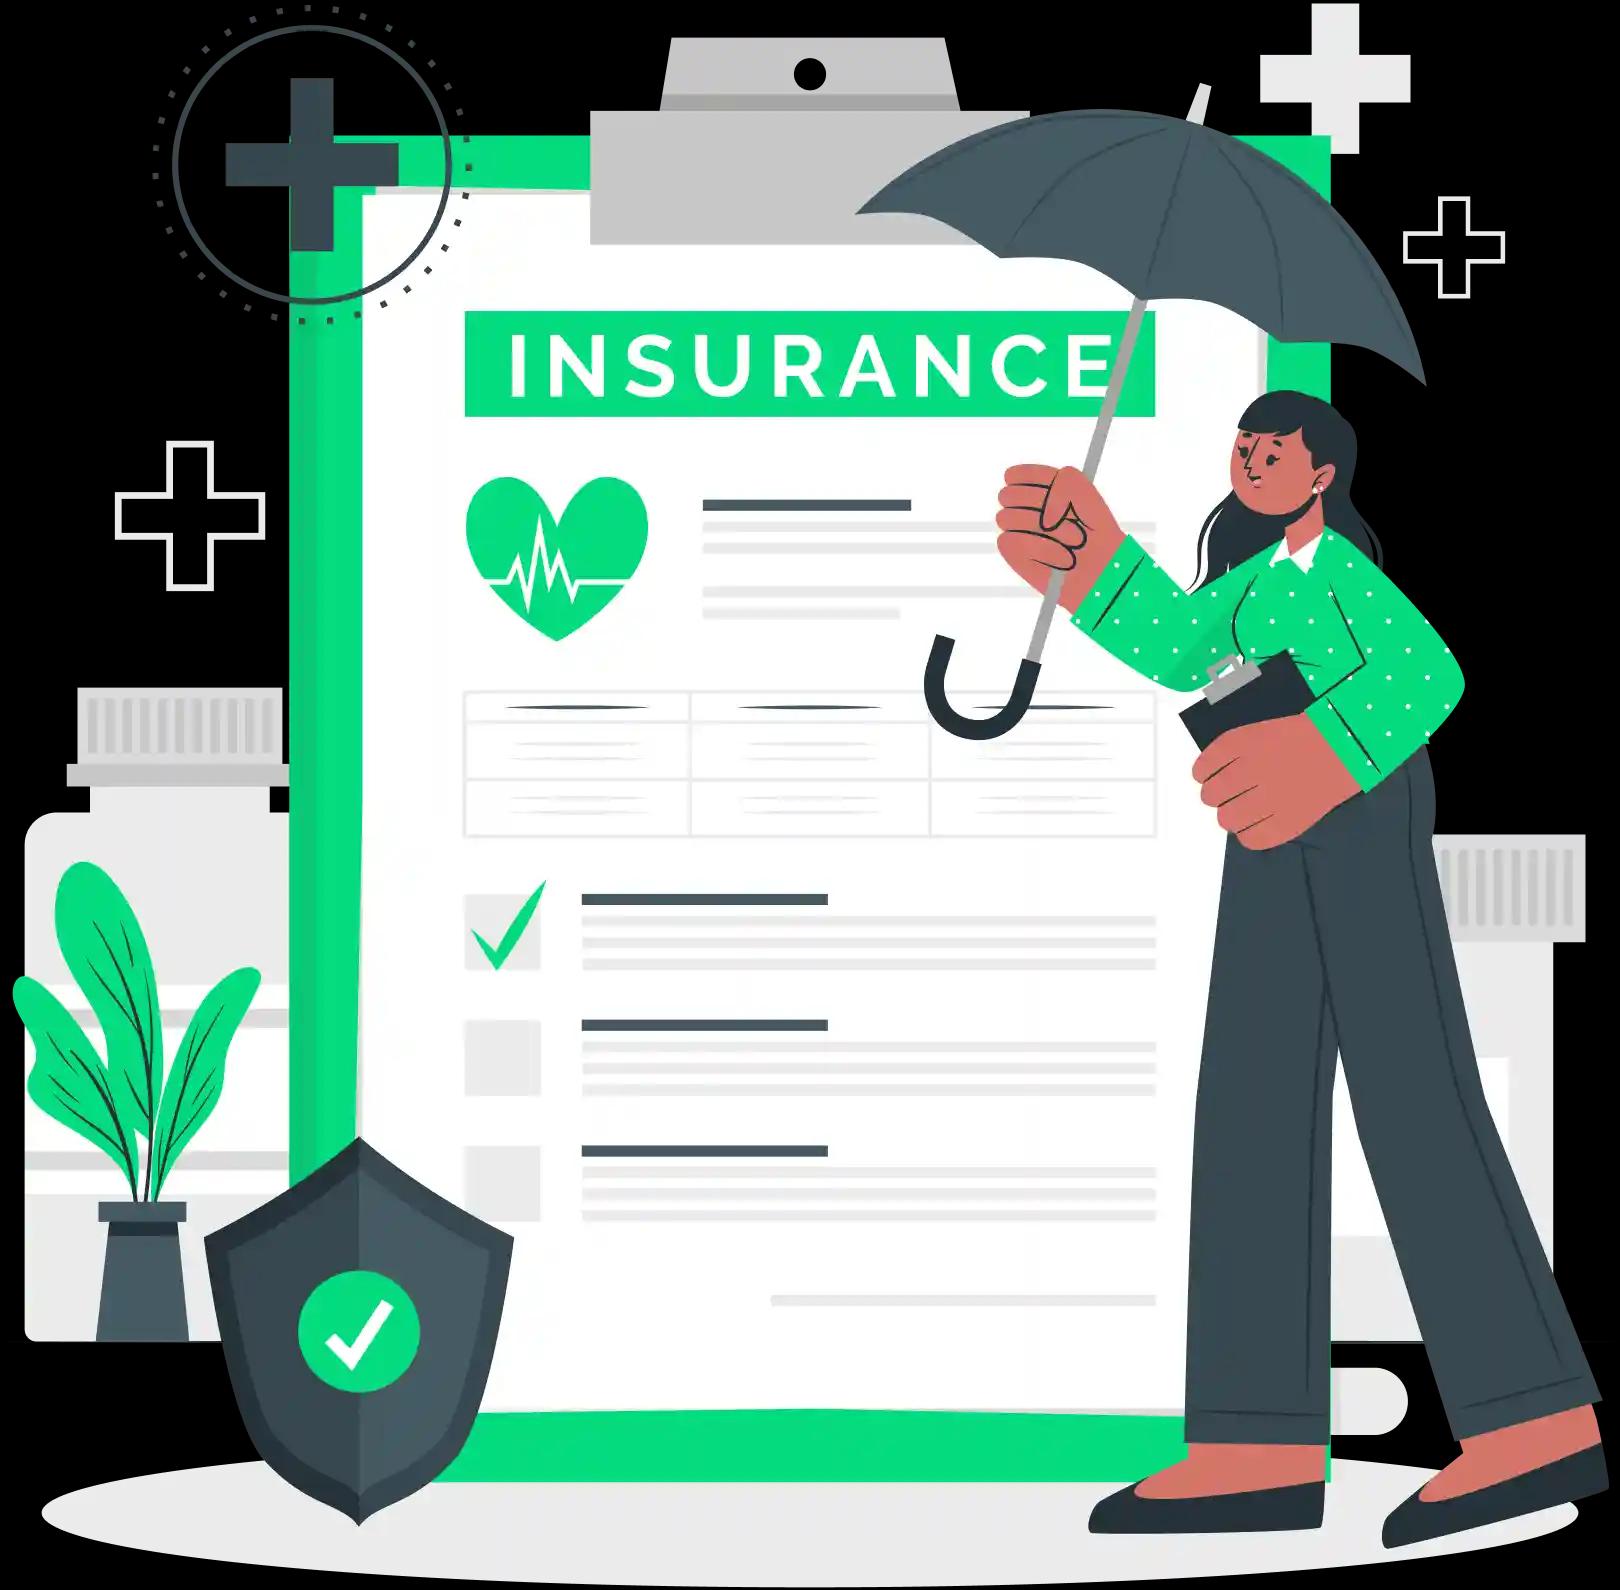 An illustration showing an oversized clipboard with 'INSURANCE' written at the top, next to a woman holding an umbrella over the clipboard, signifying protection.